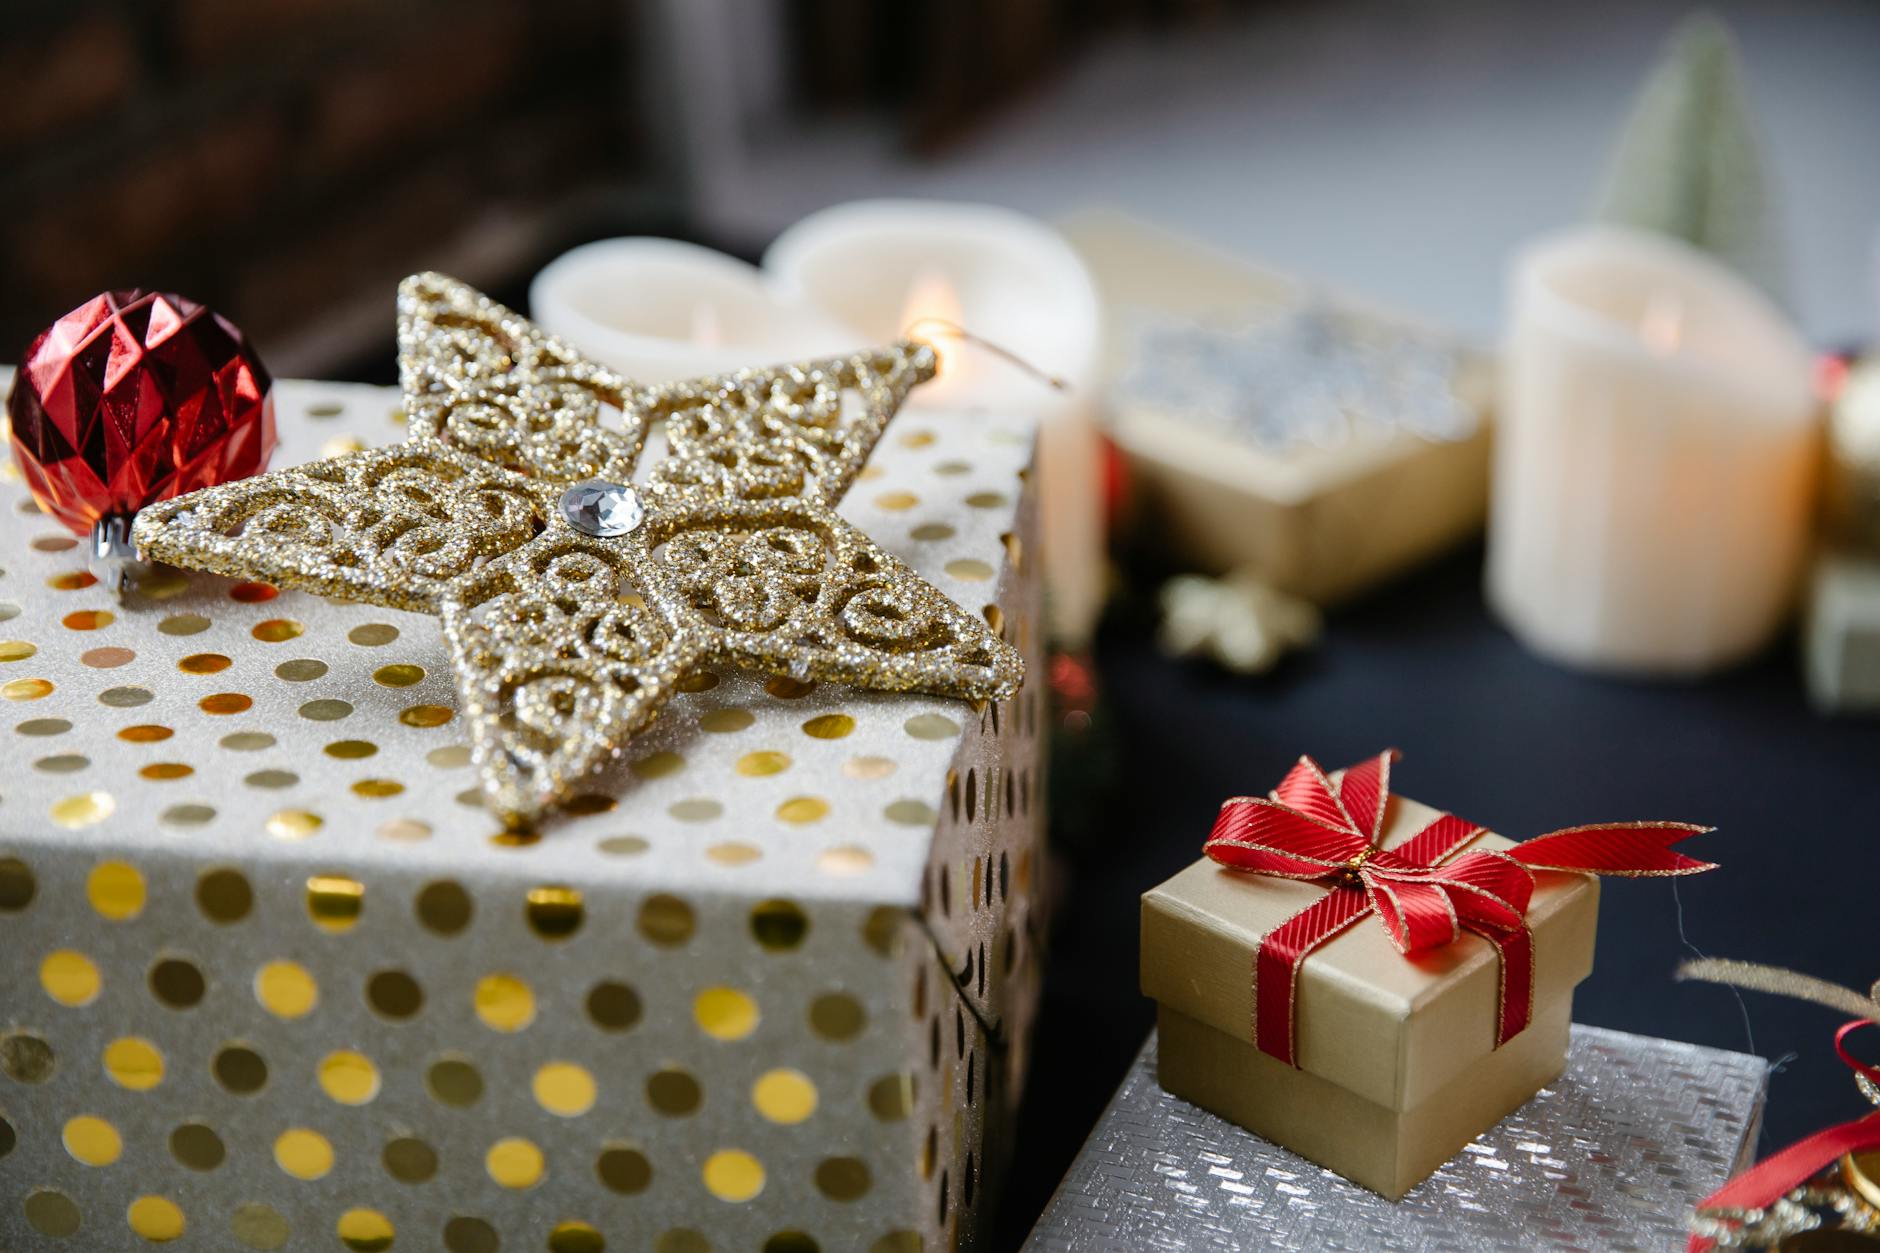 Decorative objects for Christmas on black surface